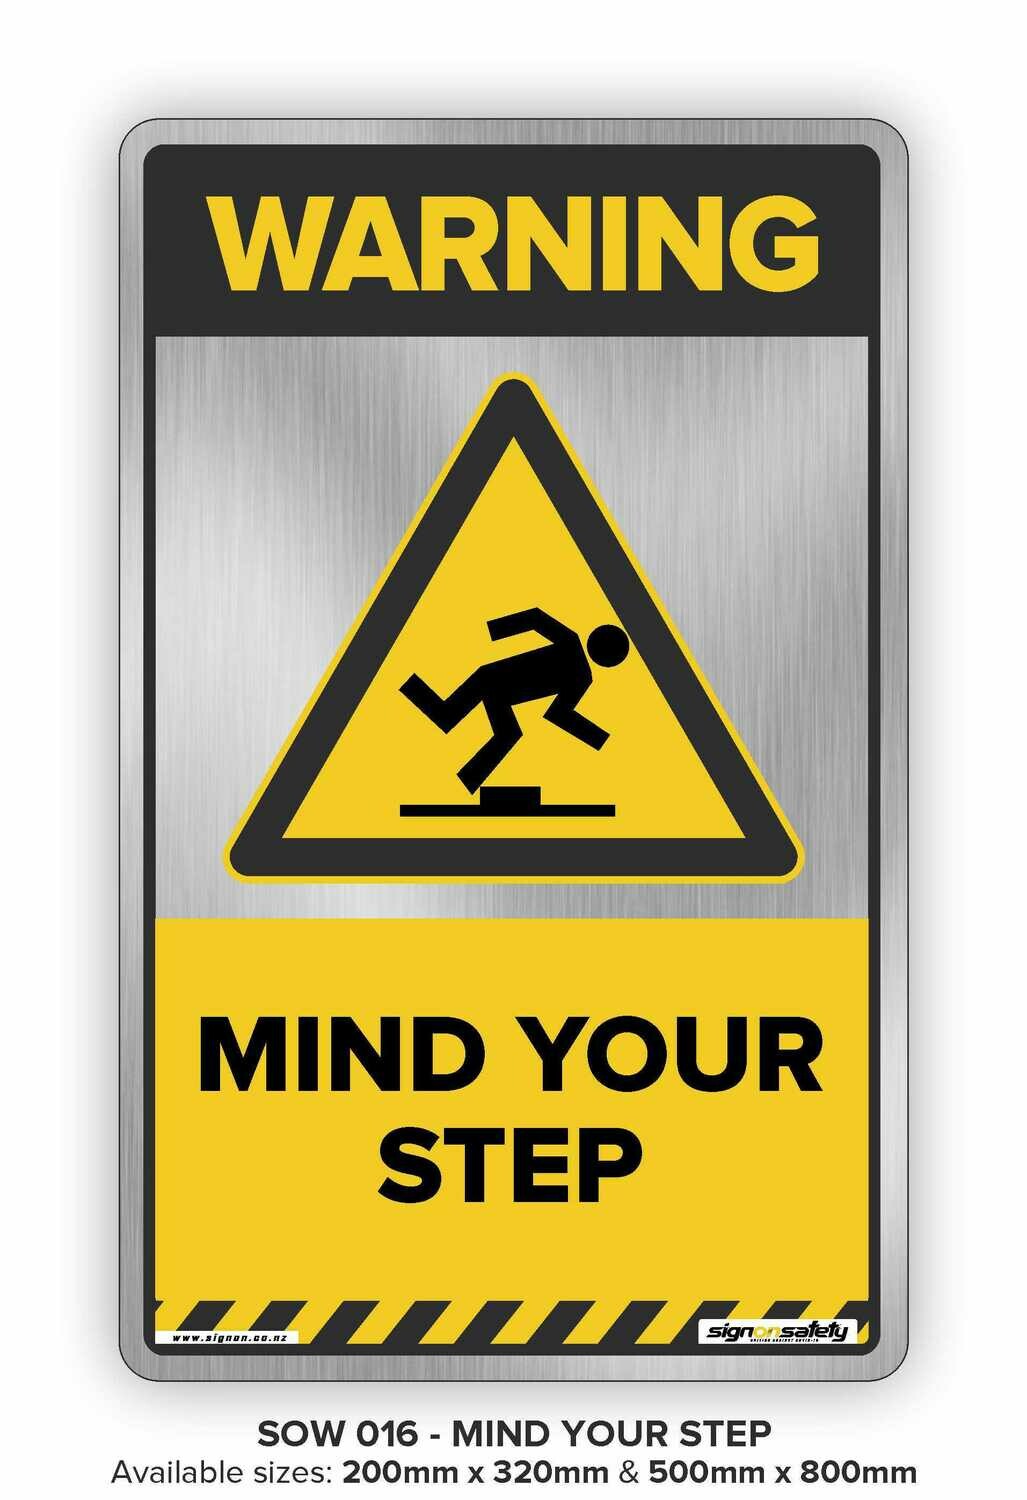 Warning - Mind Your Step